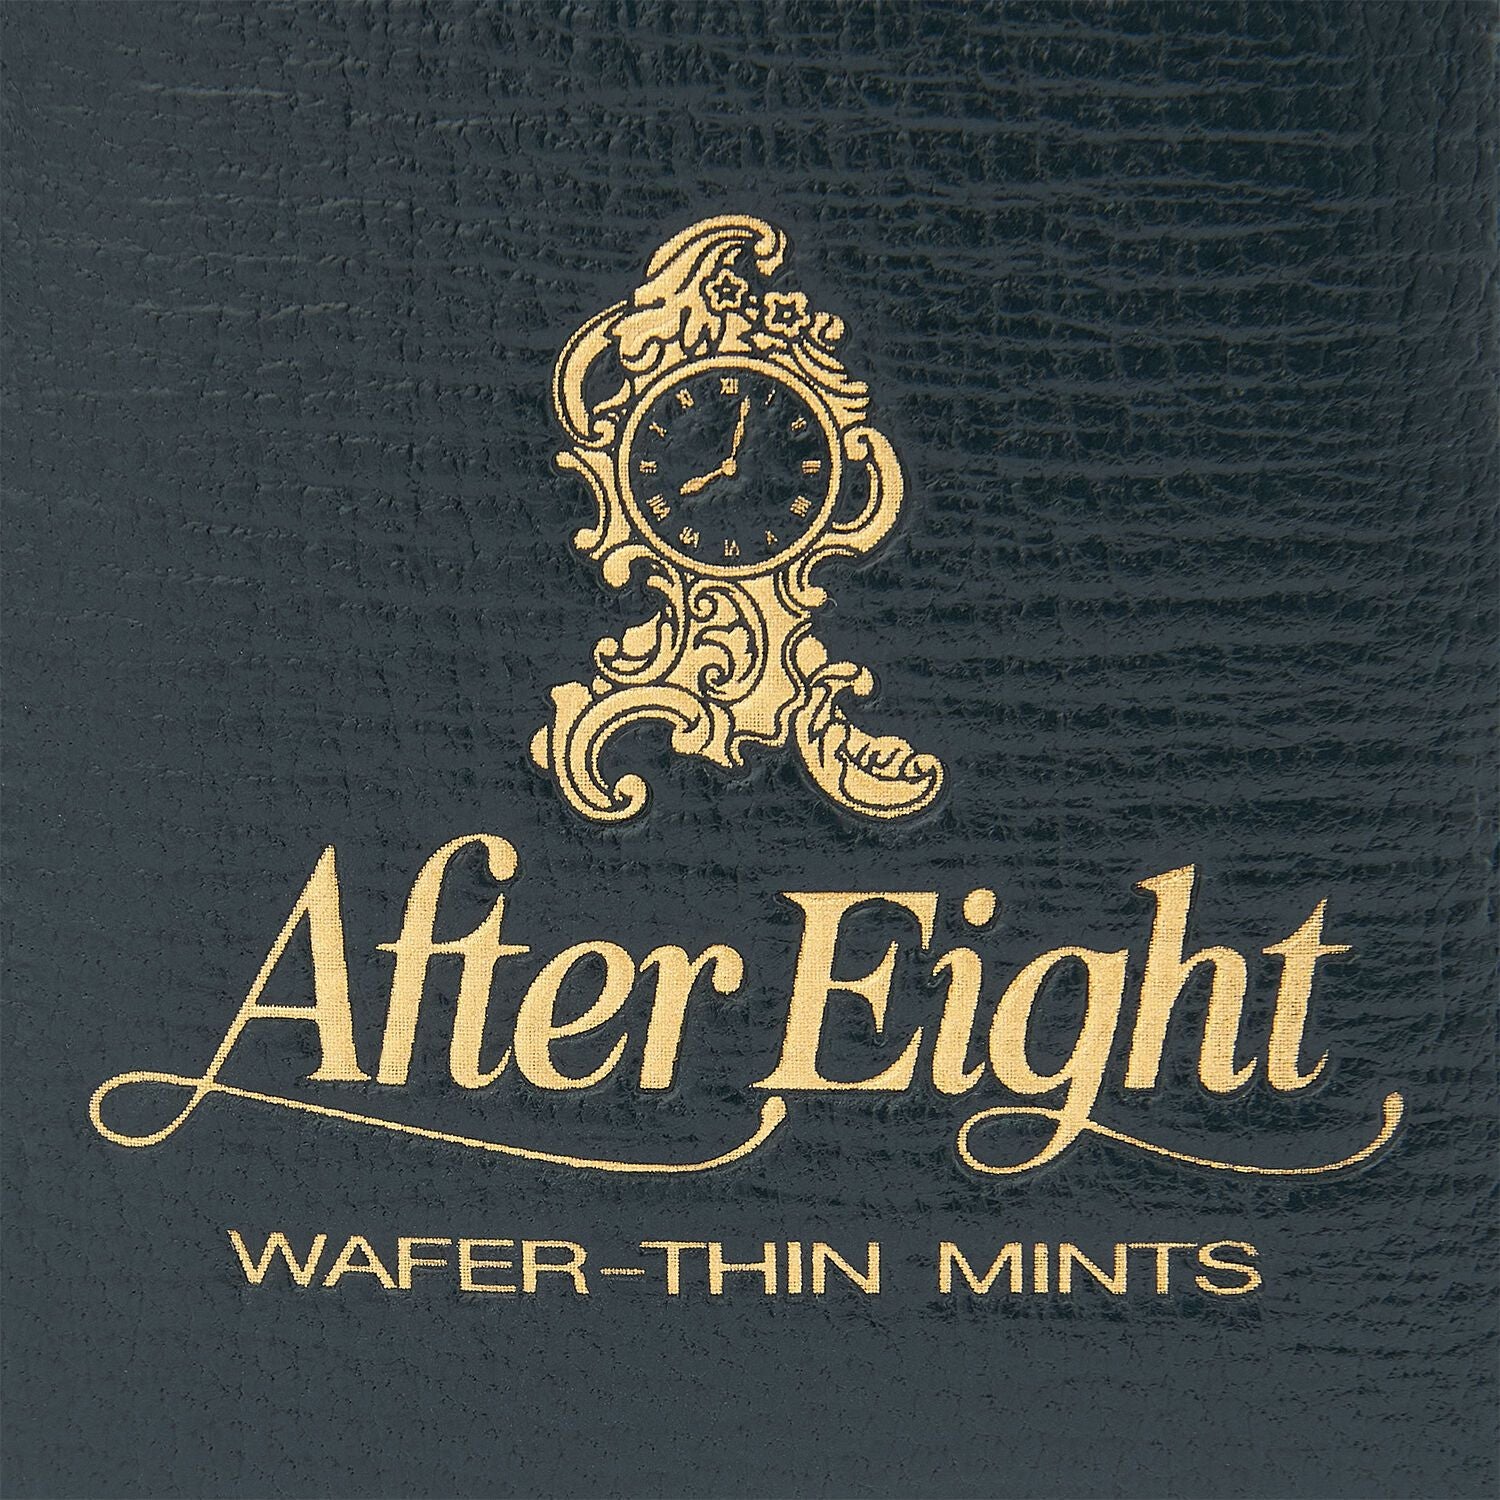 「After Eight®」 チャーム